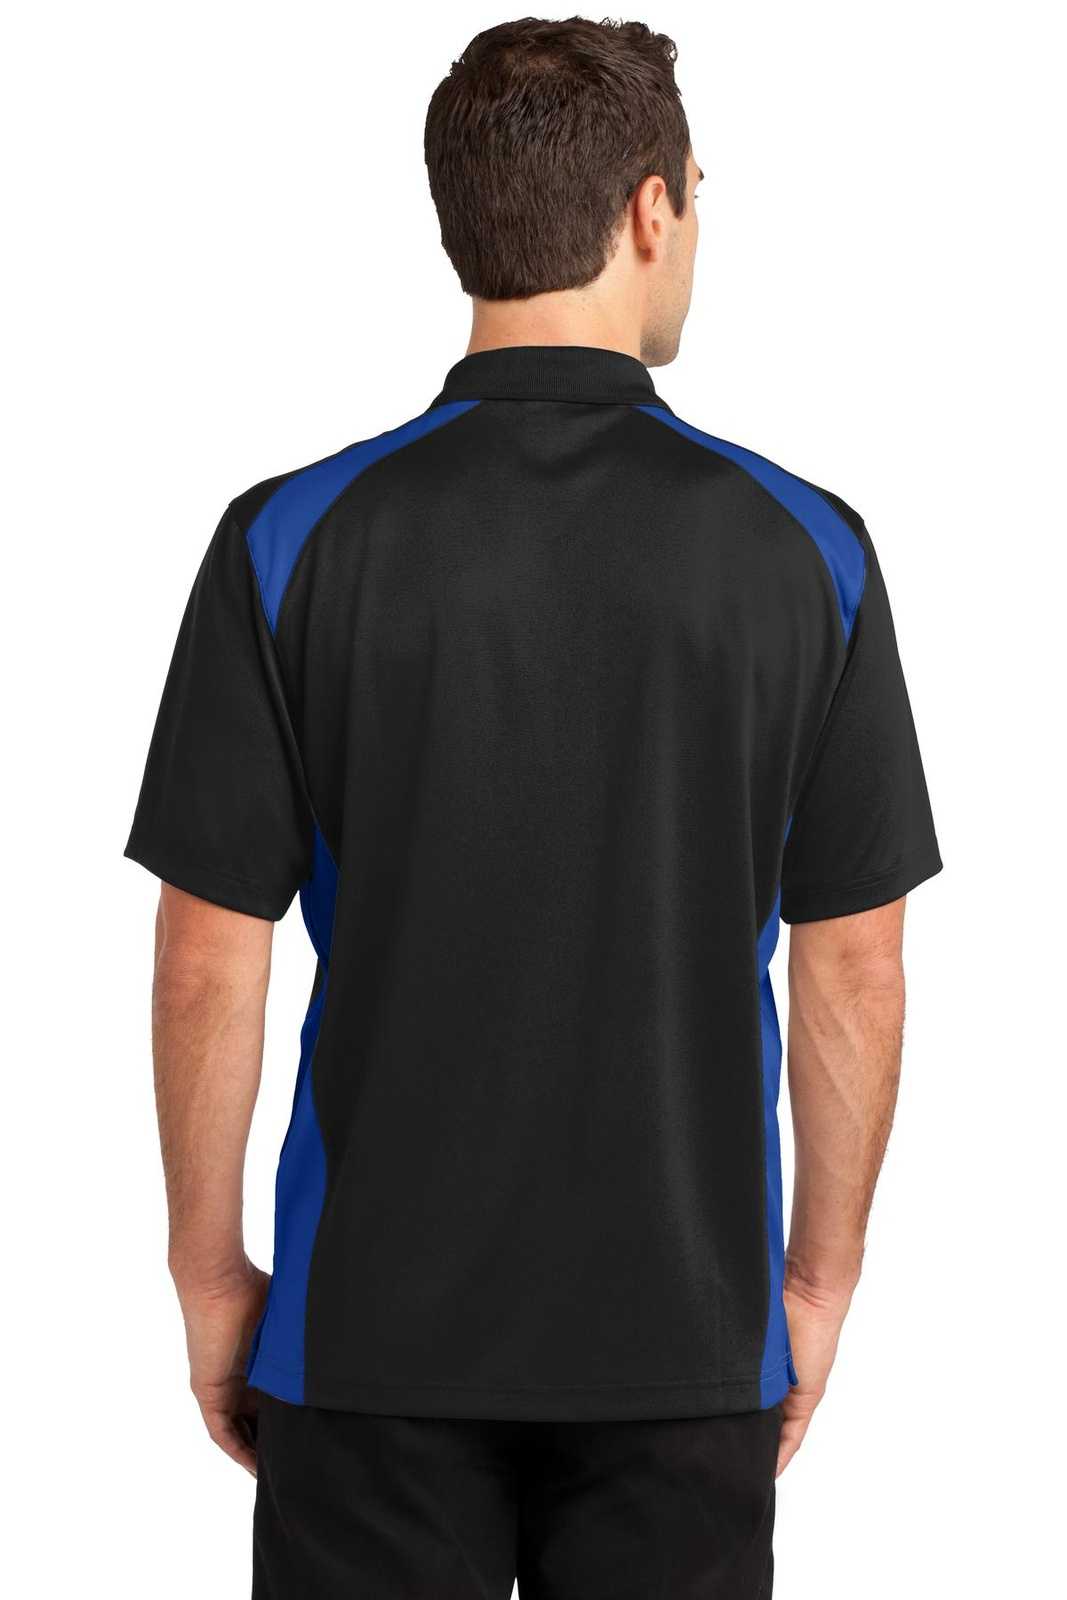 CornerStone CS416 Select Snag-Proof Two Way Colorblock Pocket Polo - Black Royal - HIT a Double - 1